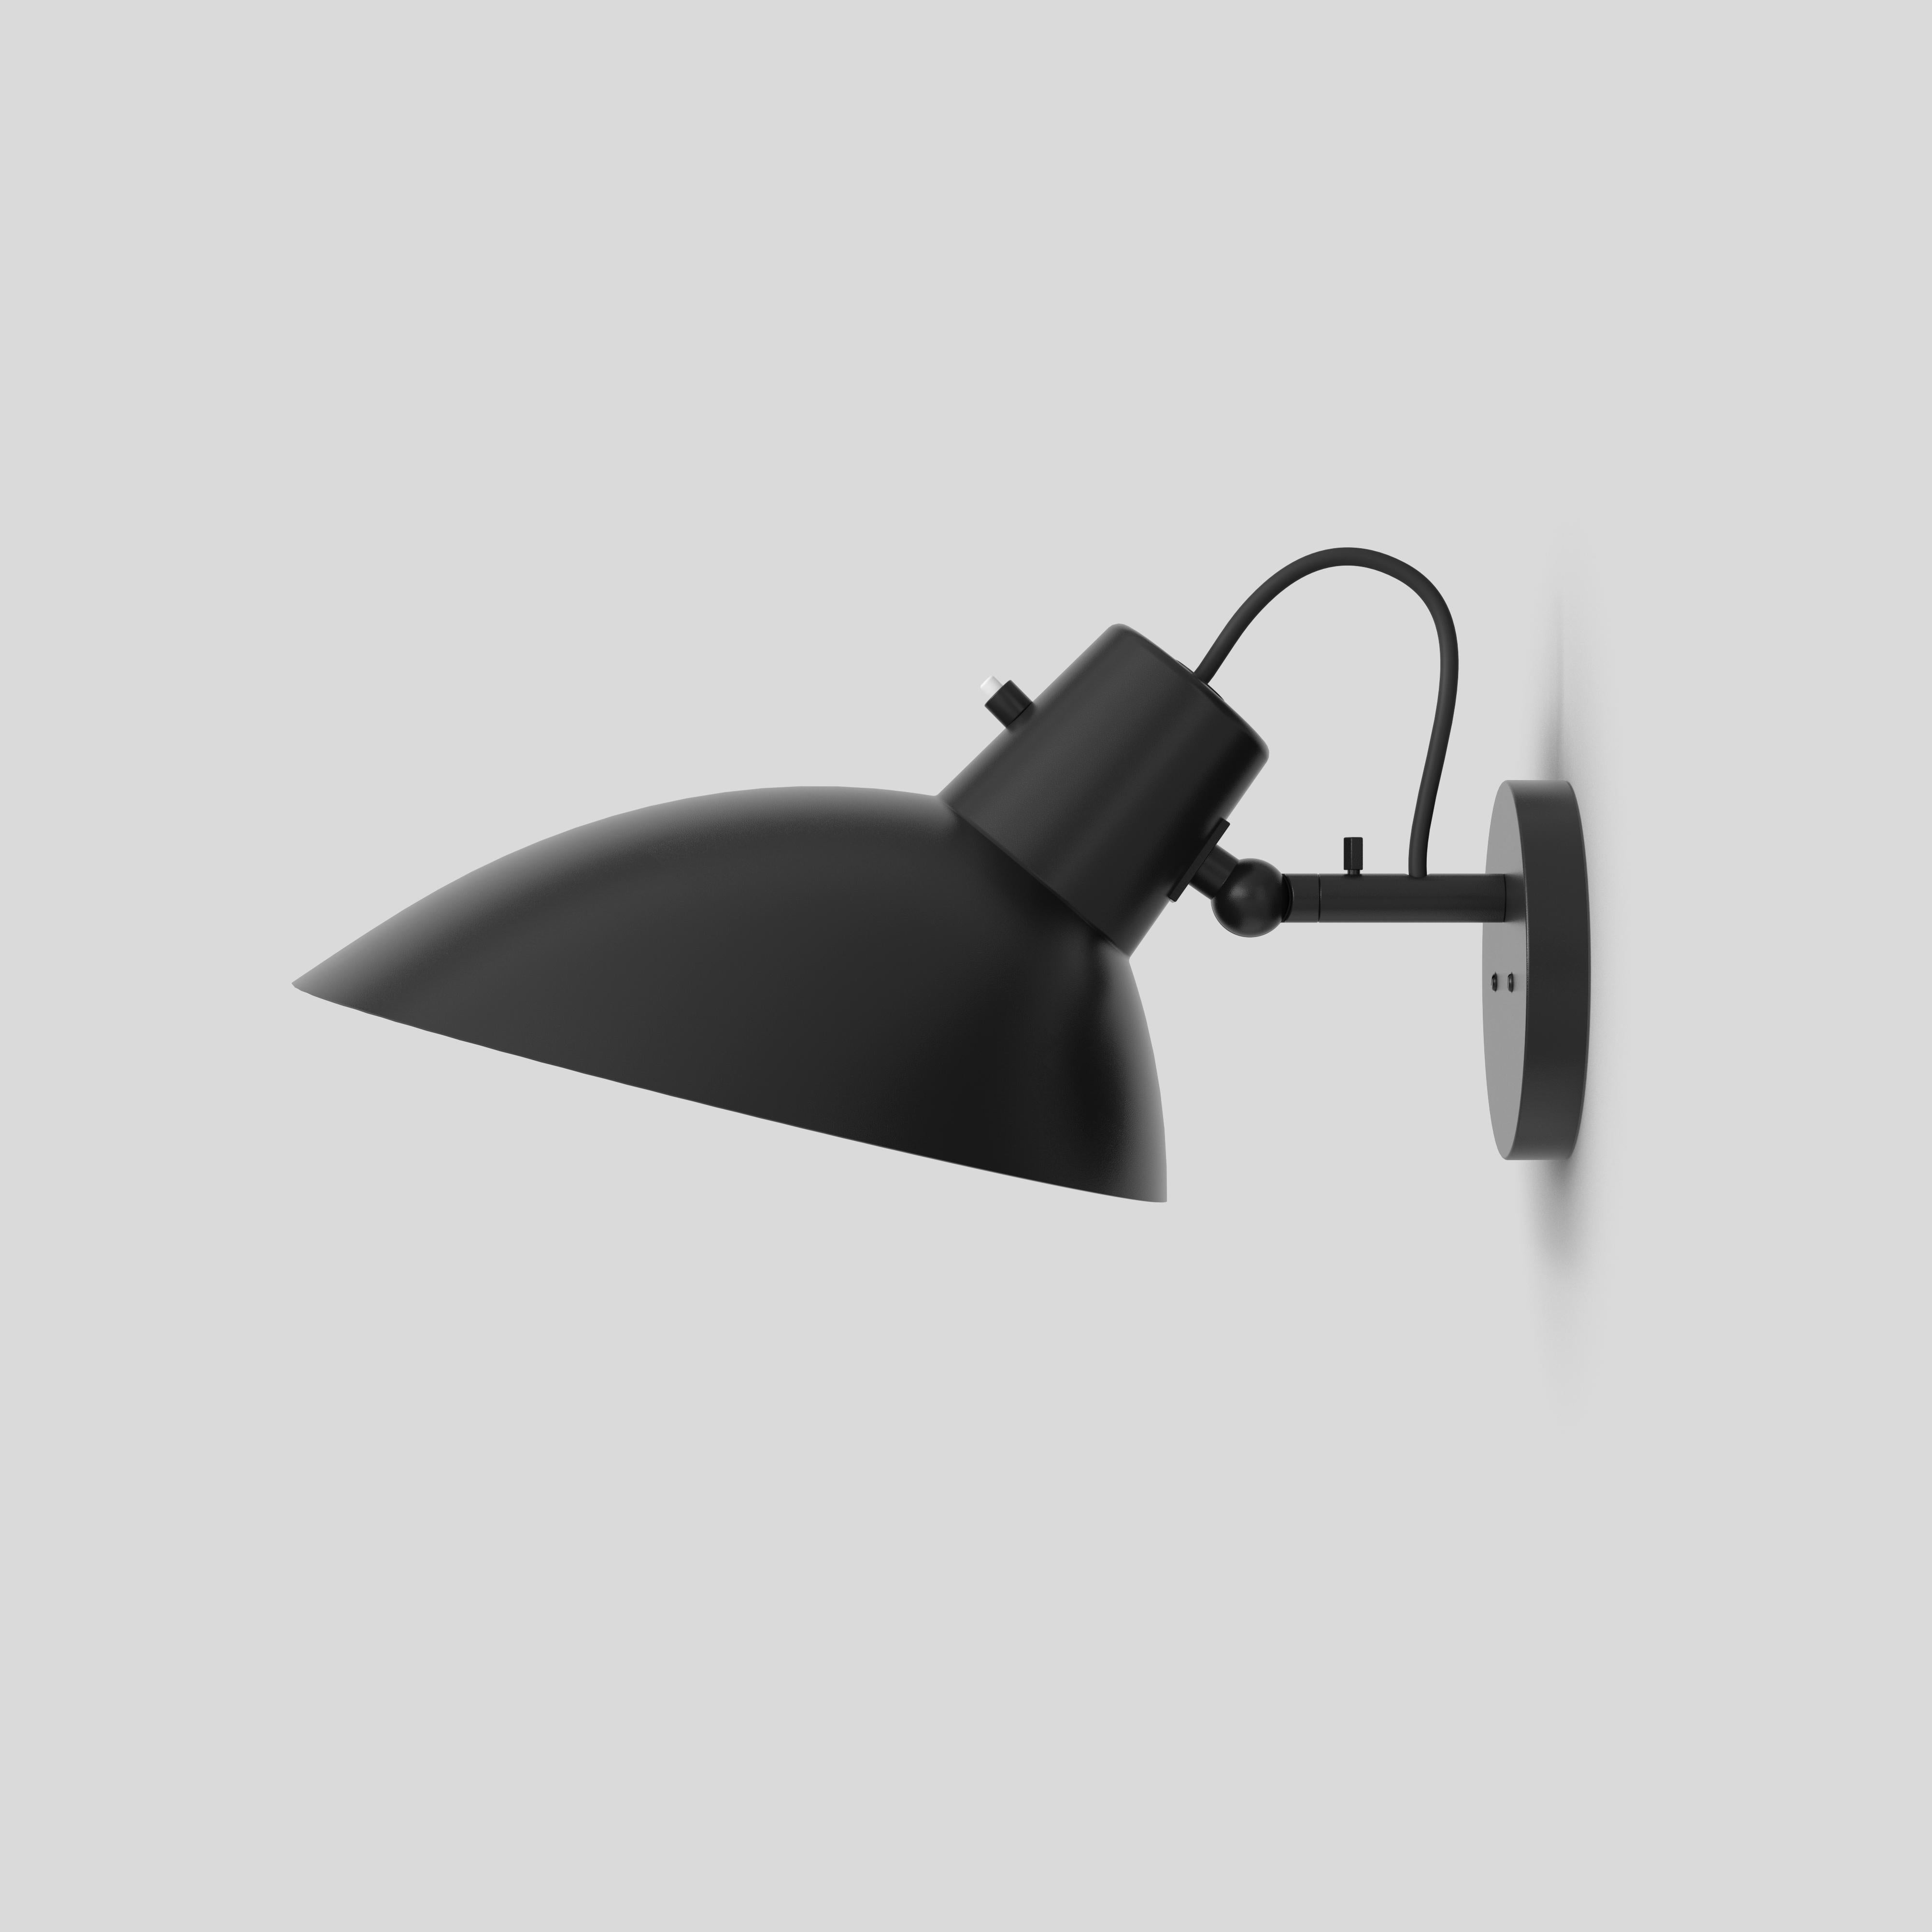 VV Cinquanta wall lamp
Design by Vittoriano Viganò
This version is with Black Lacquered Reflector and Black Mount.

The VV Cinquanta features an elegant and versatile posable direct light source that can swivel and tilt. The Wall model is